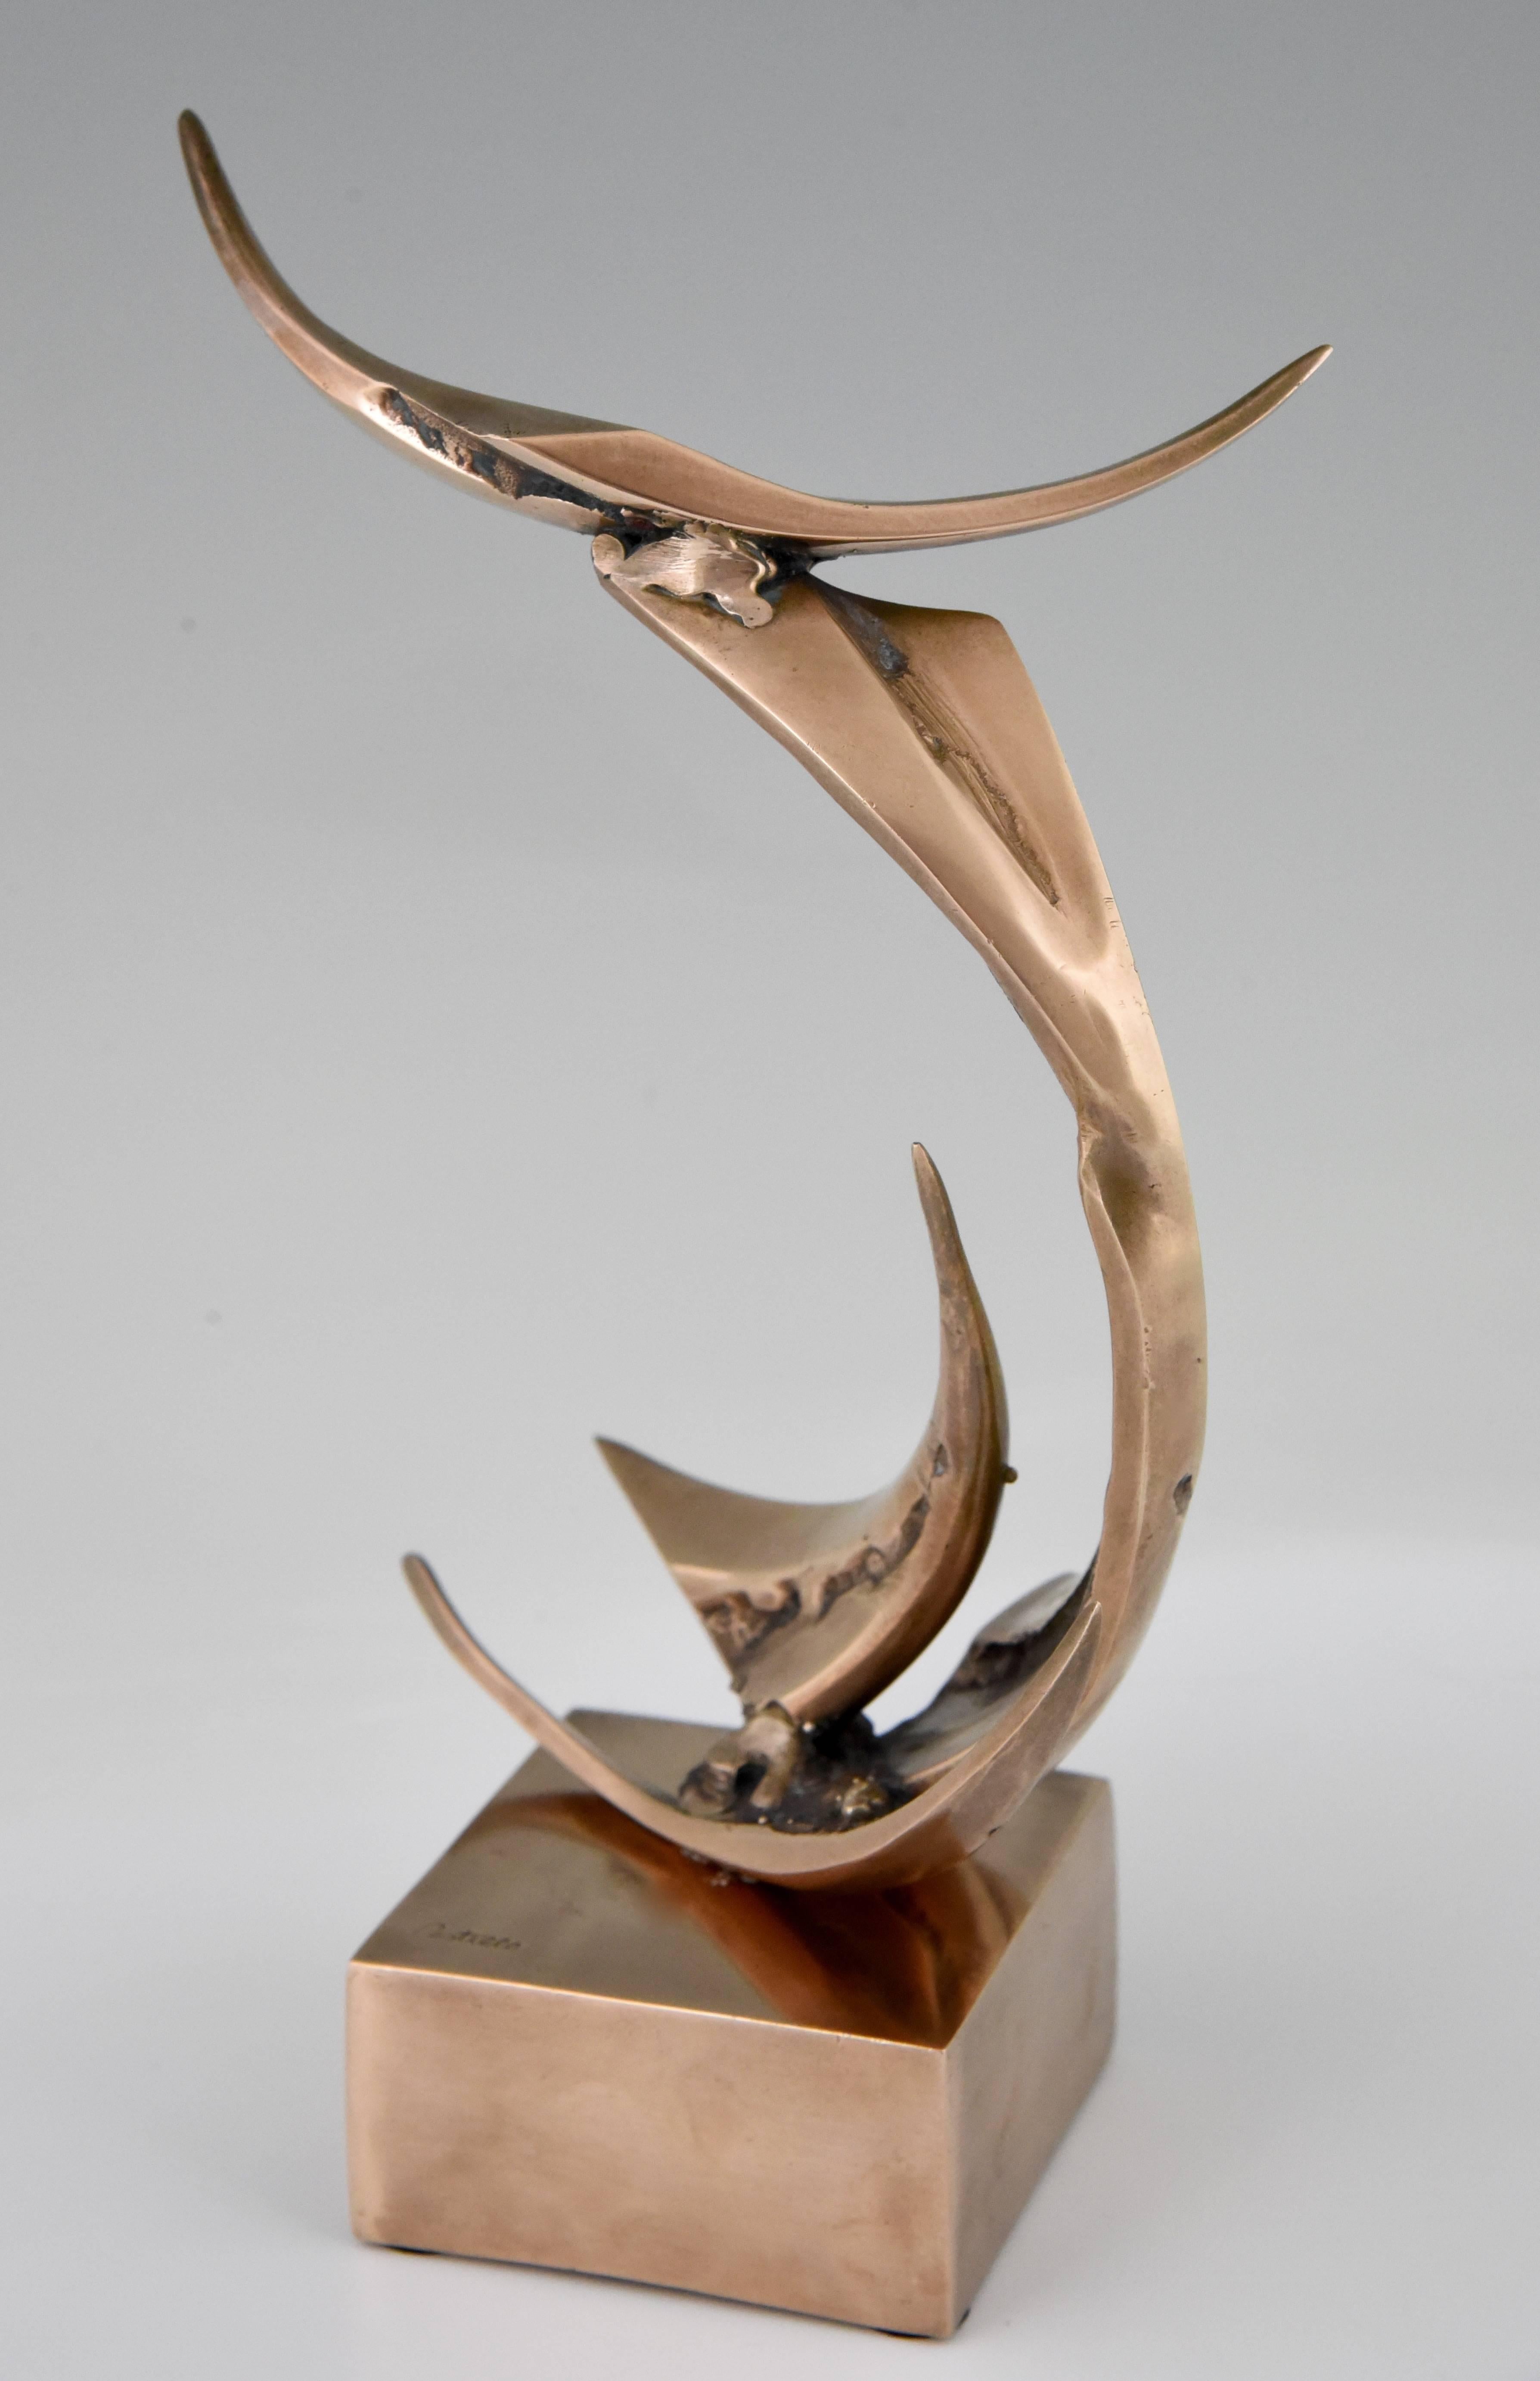 Stylish abstract bronze sculpture by the Spanish artist Jorge Castillo. Signed and numbered. 
Artist/ Maker: Jorge Castillo
Signature/ Marks: Castillo ?3/85?
Style: Mid-Century Modern
Date: 1970
Material: Bronze
Origin: Spain
Size: H. 23 cm.